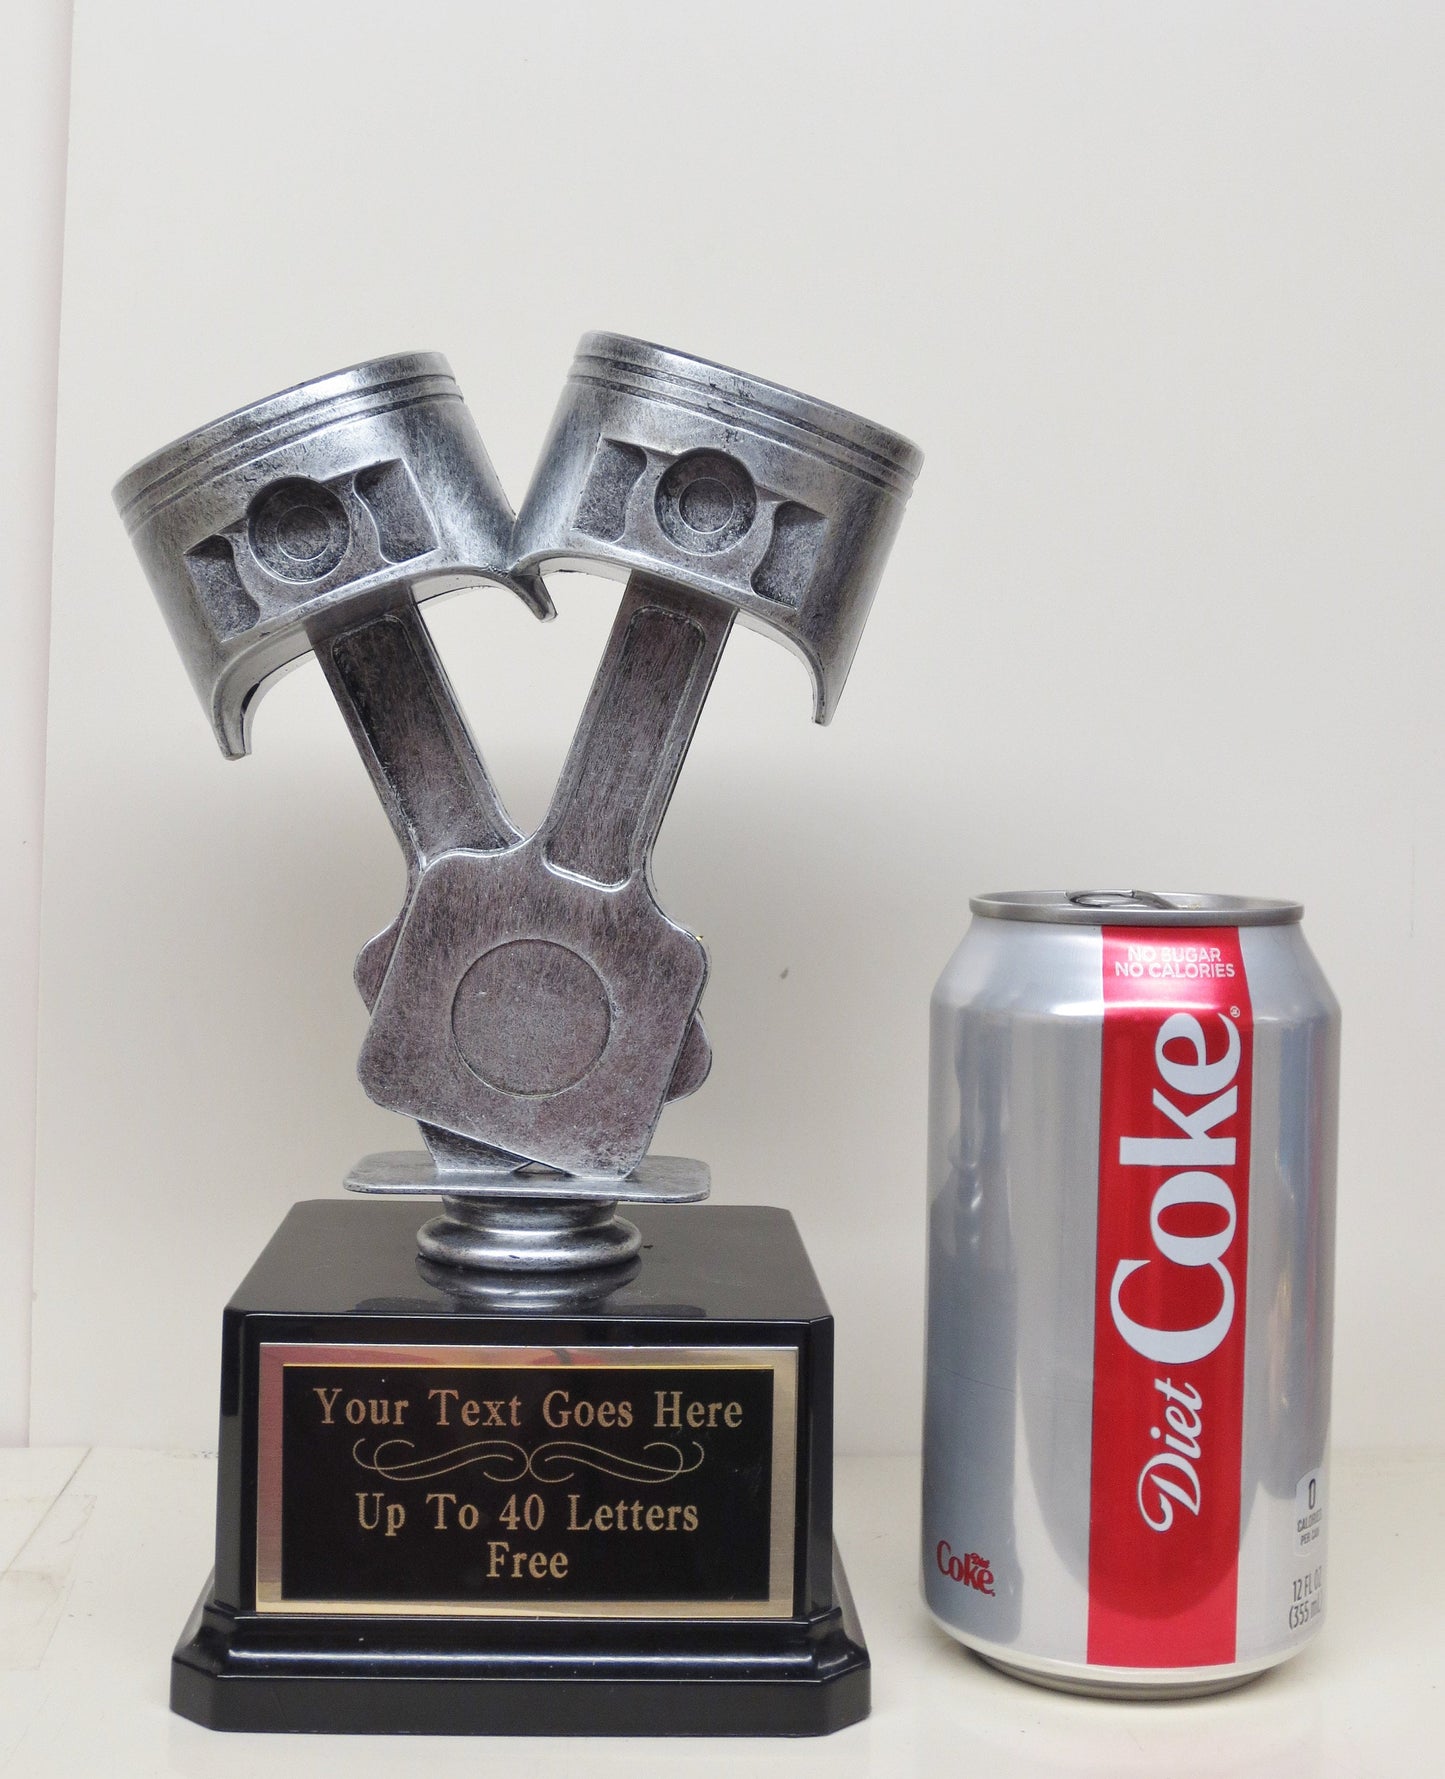 Racing Trophy Car Show Trophy 8" Rods & Pistons Hot Rod Trophy Plastic Silver Piston Award Winner Best In Show Award Participant